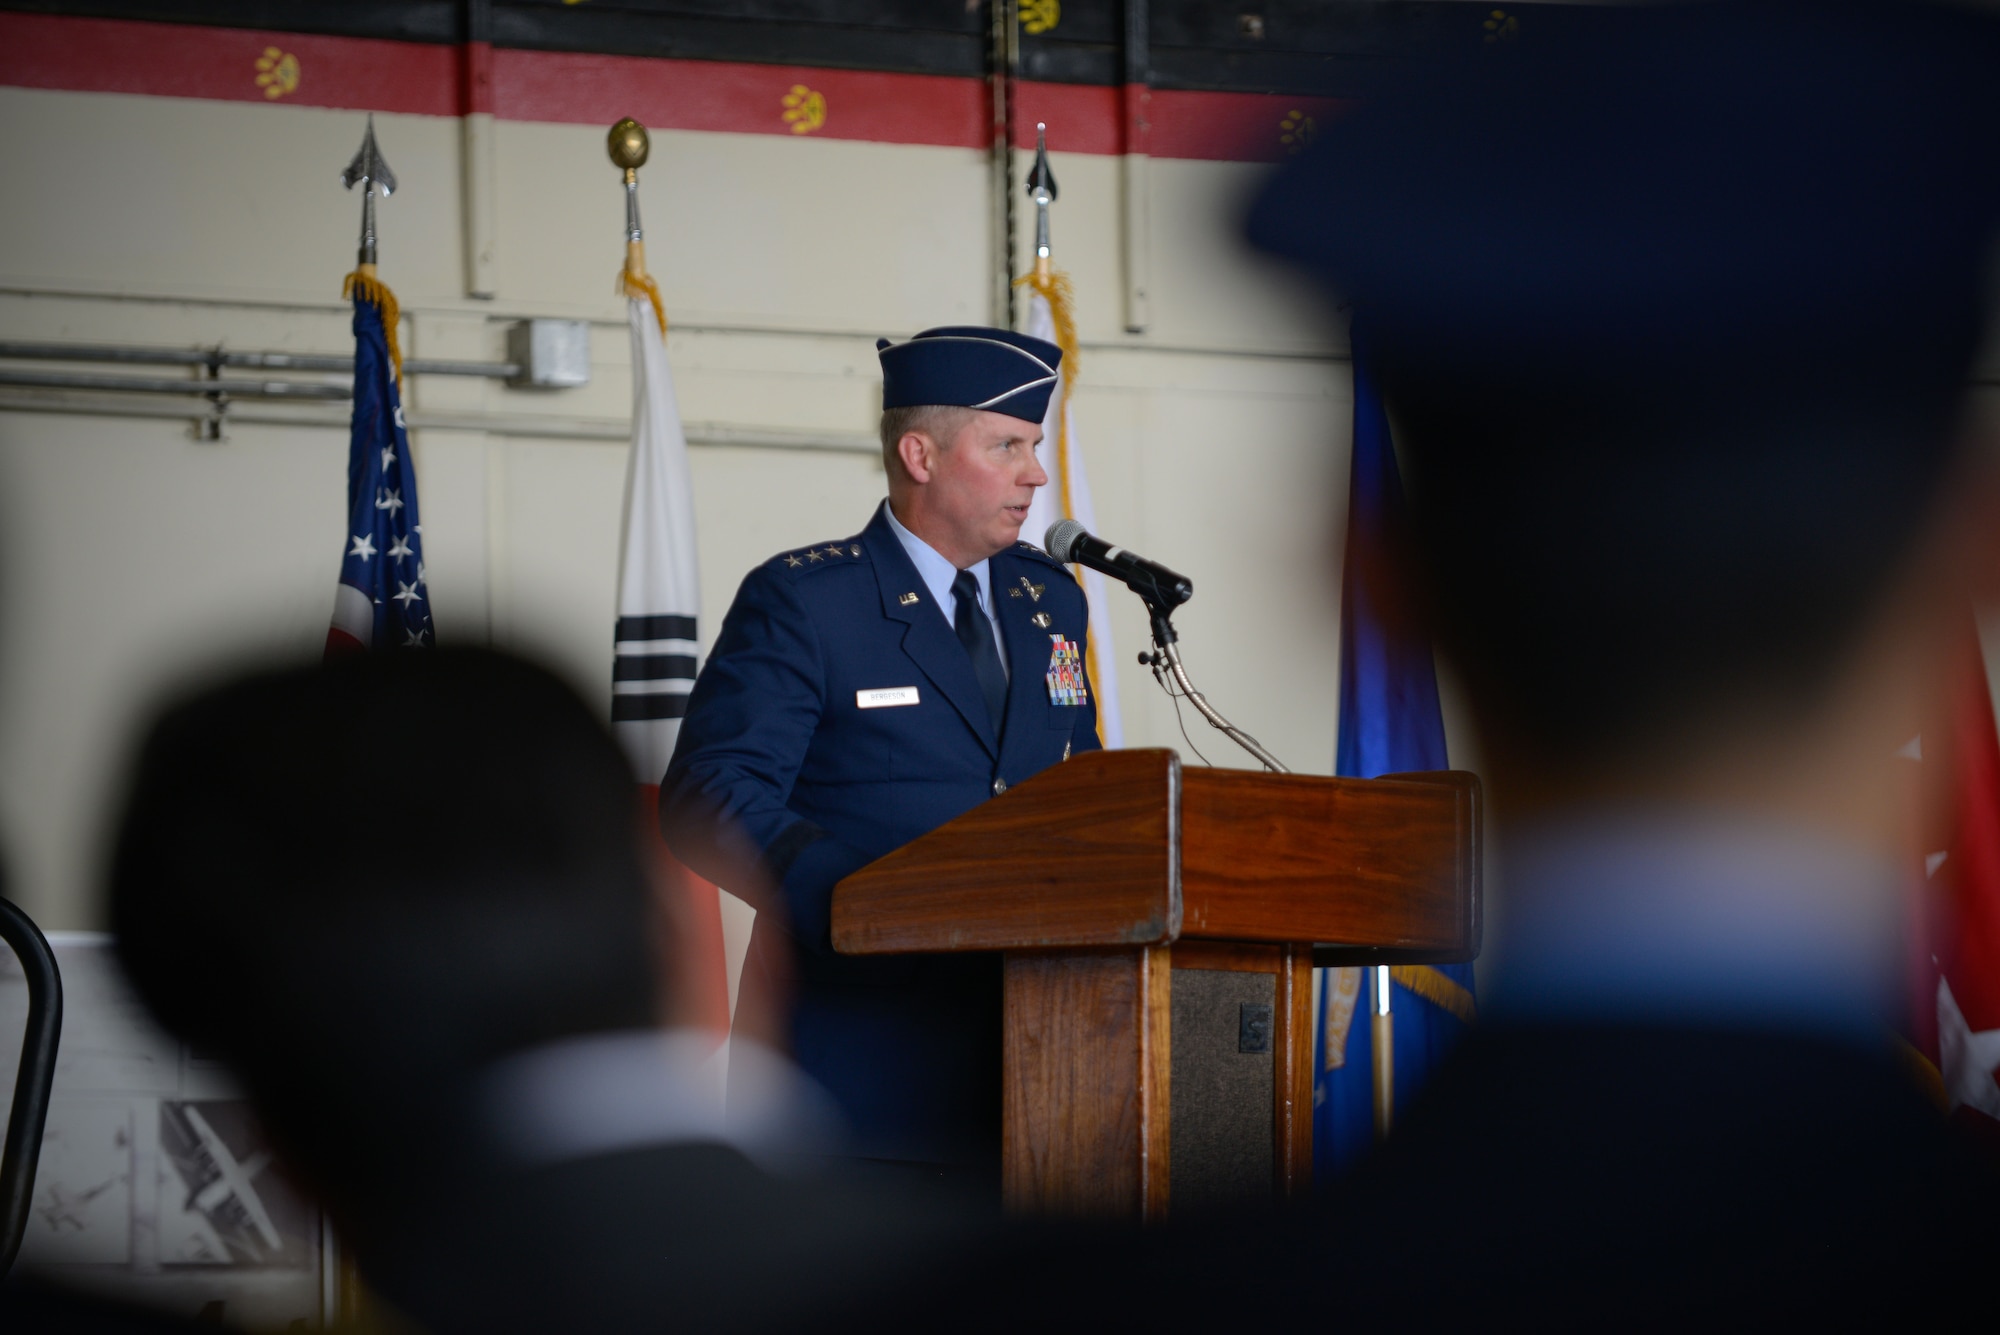 Lt. Gen. Thomas W. Bergeson addresses the Airmen of Seventh Air Force and distinguished visitors during a change of command ceremony at Osan Air Base July 8, 2016. Bergeson accepted command of Seventh Air Force, taking over for Lt. Gen. Terrence J. O'Shaughnessy who moves on to take over as Pacific Air Forces commander. (U.S. Air Force photo by Senior Airman Dillian Bamman)